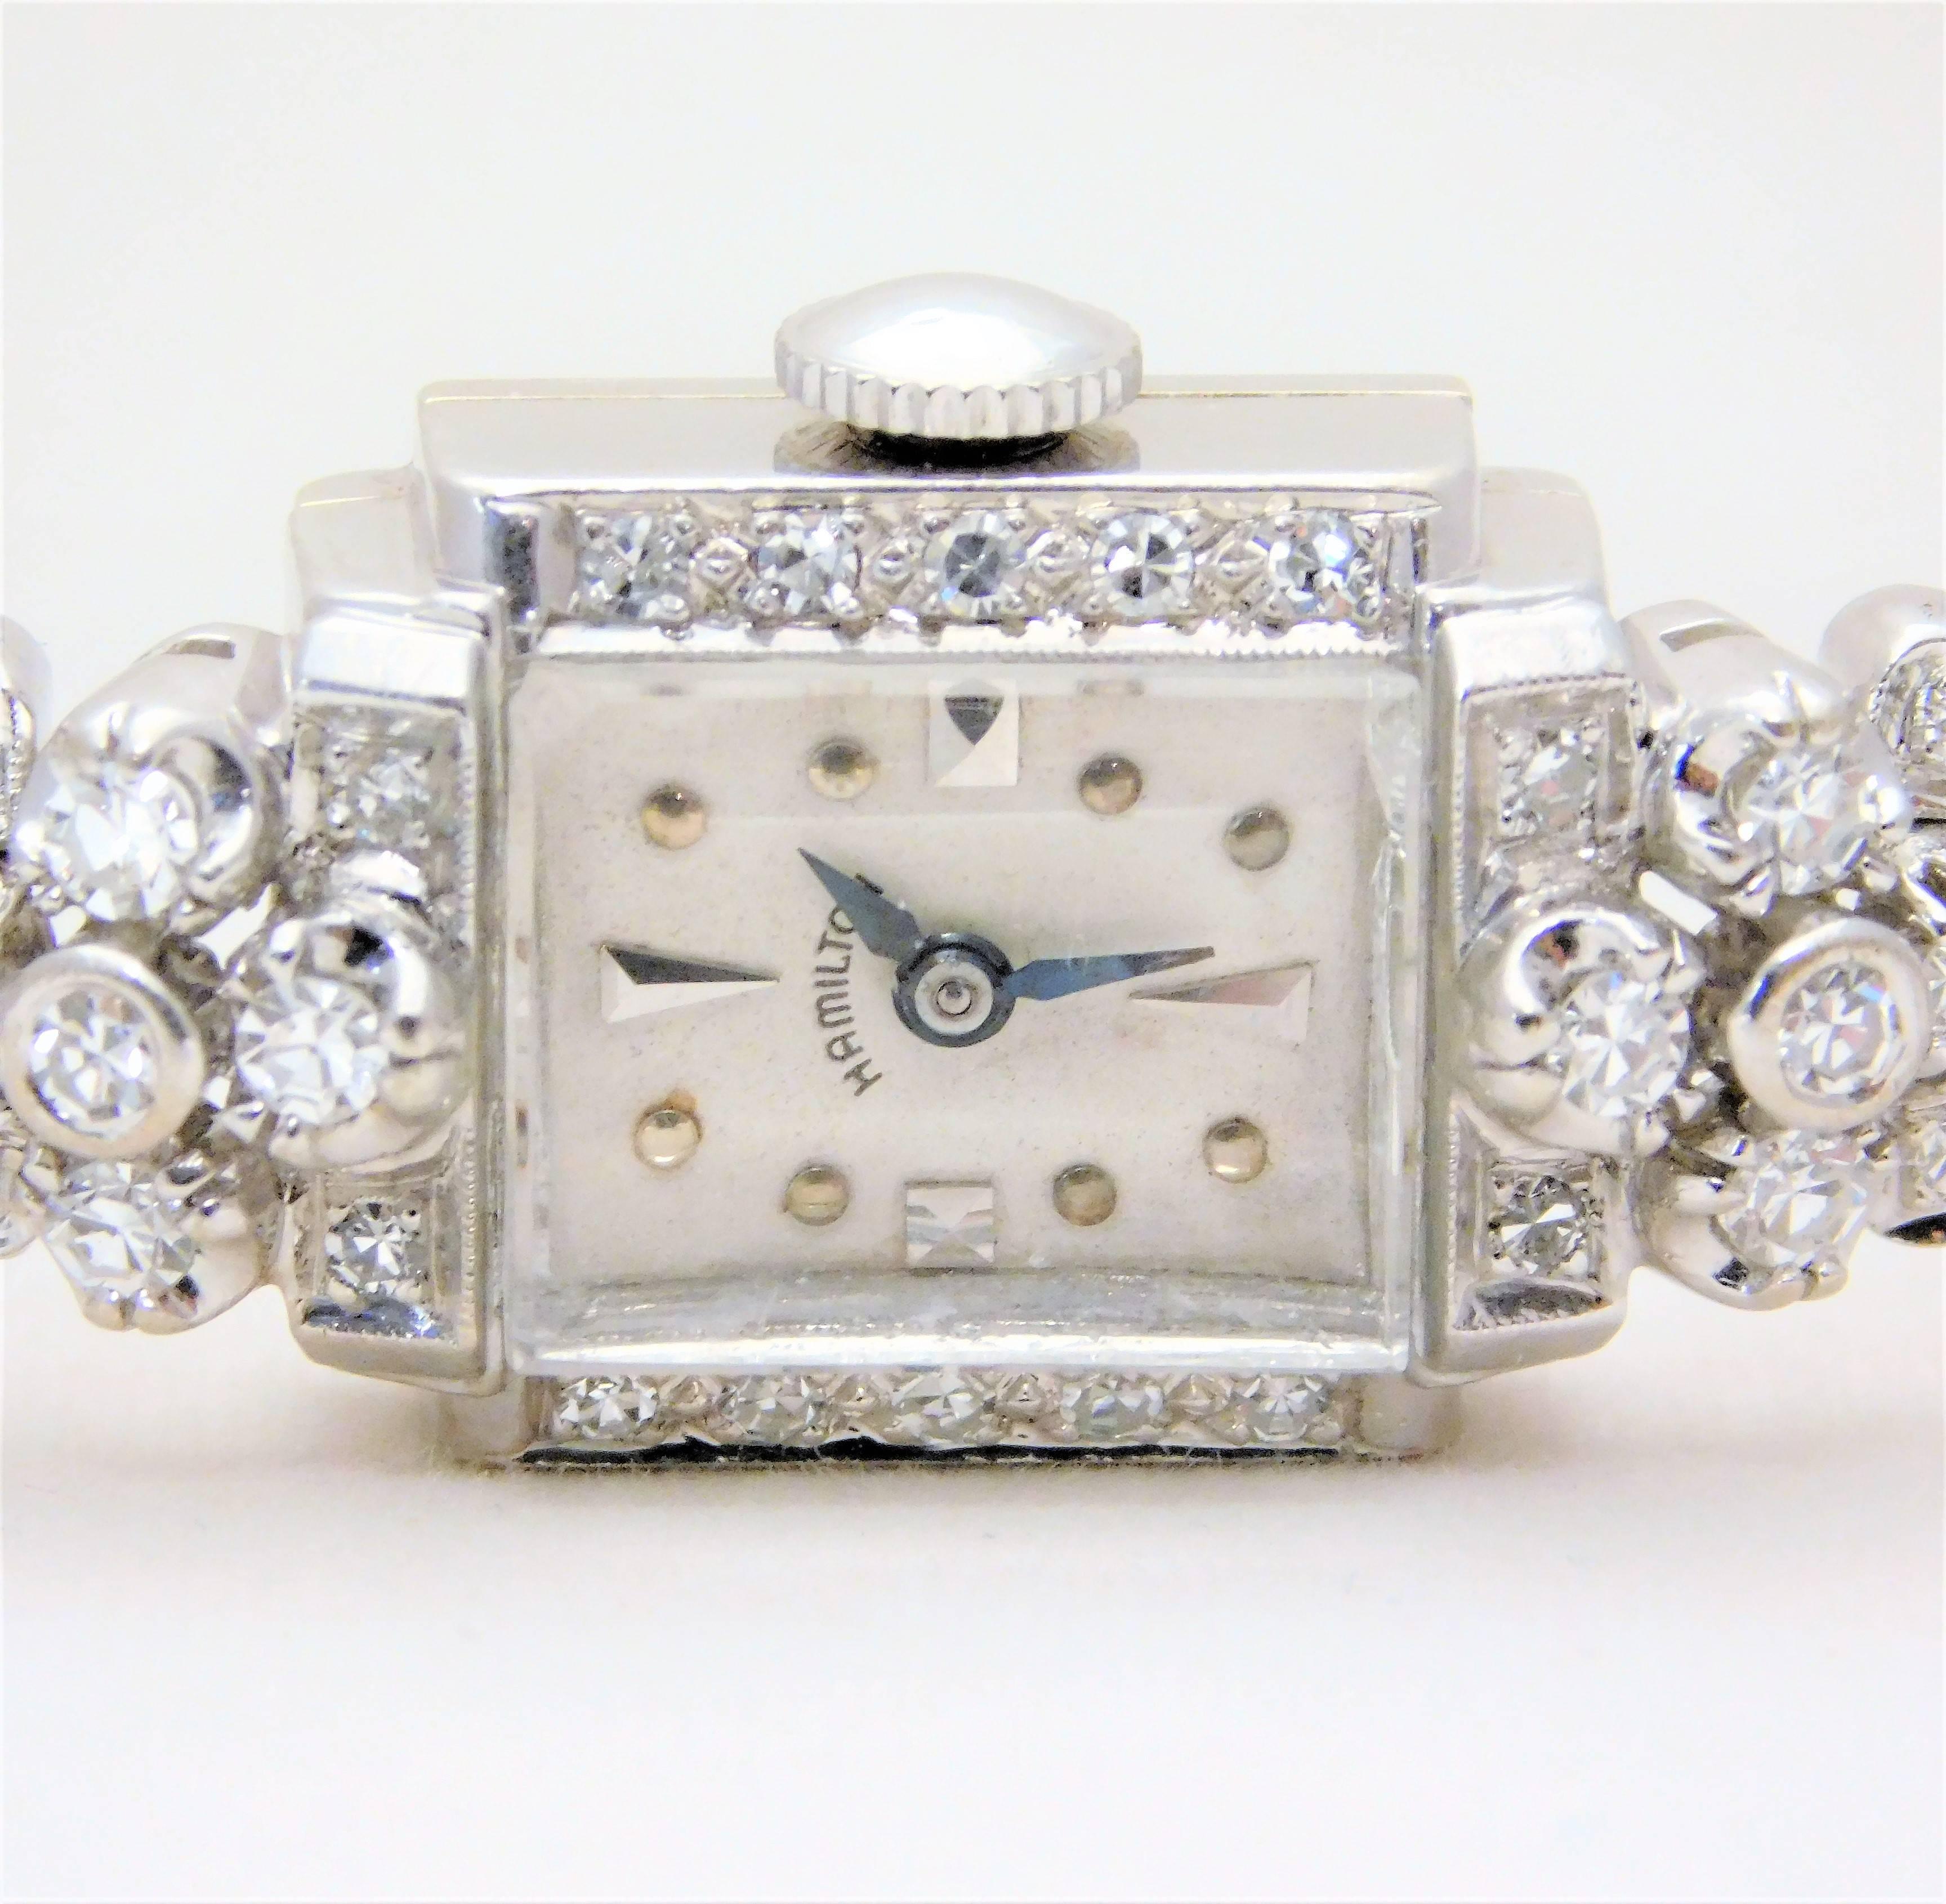 
Circa 1912. This absolutely beautiful Art Deco Ladies Hamilton Diamond wrist watch is made of solid 14k white gold. It has all its original parts along with its 757 model, 22 jewel Hamilton manual movement. It has just been serviced and cleaned and